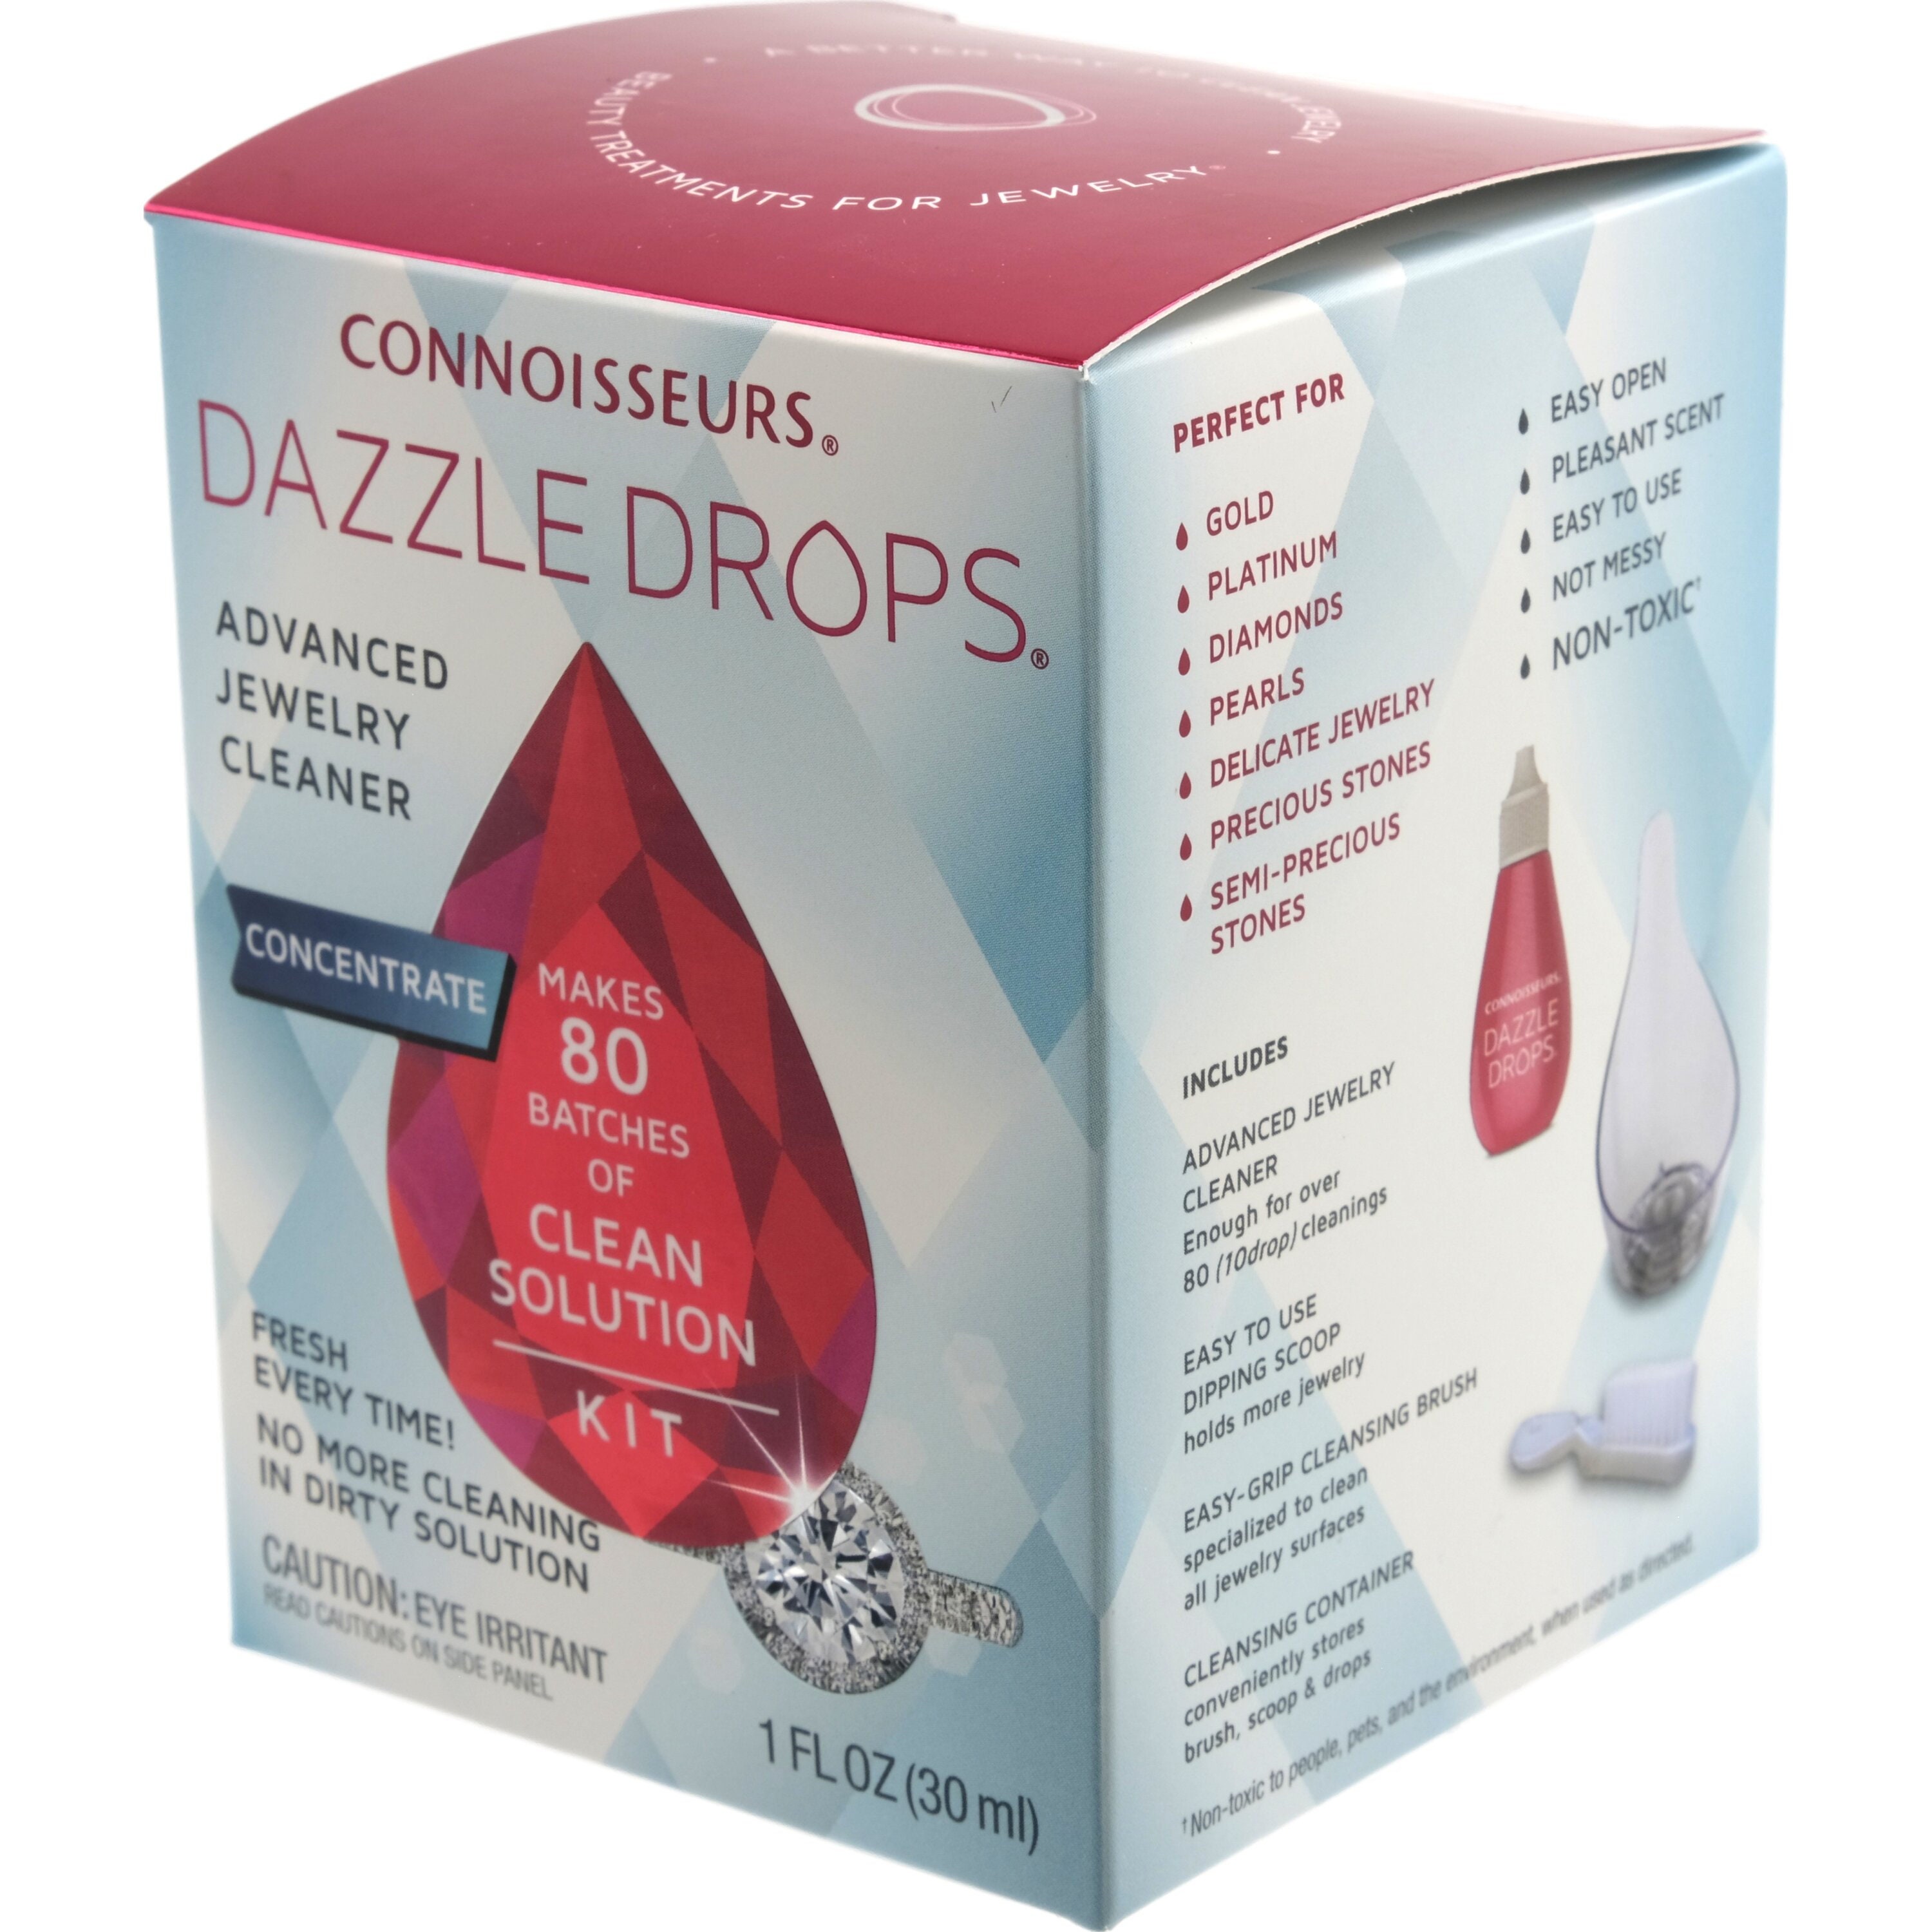  CONNOISSEURS Advanced Dazzle Drops, Jewelry Cleaner